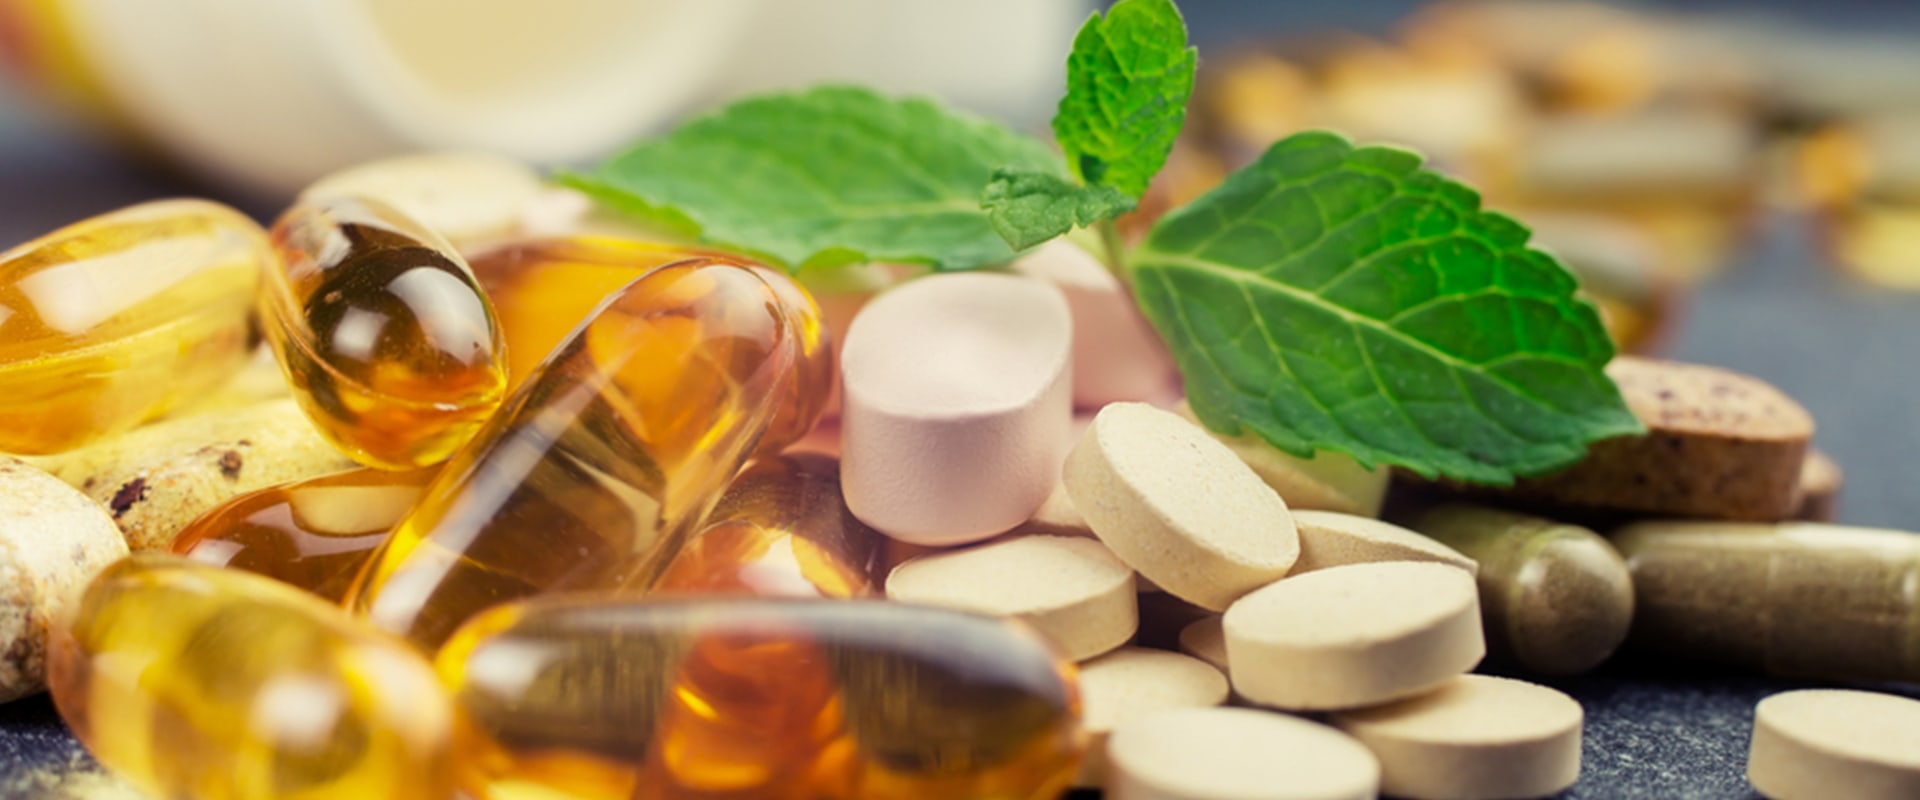 Do Multivitamins Really Contain Vitamins? - An Expert's Perspective